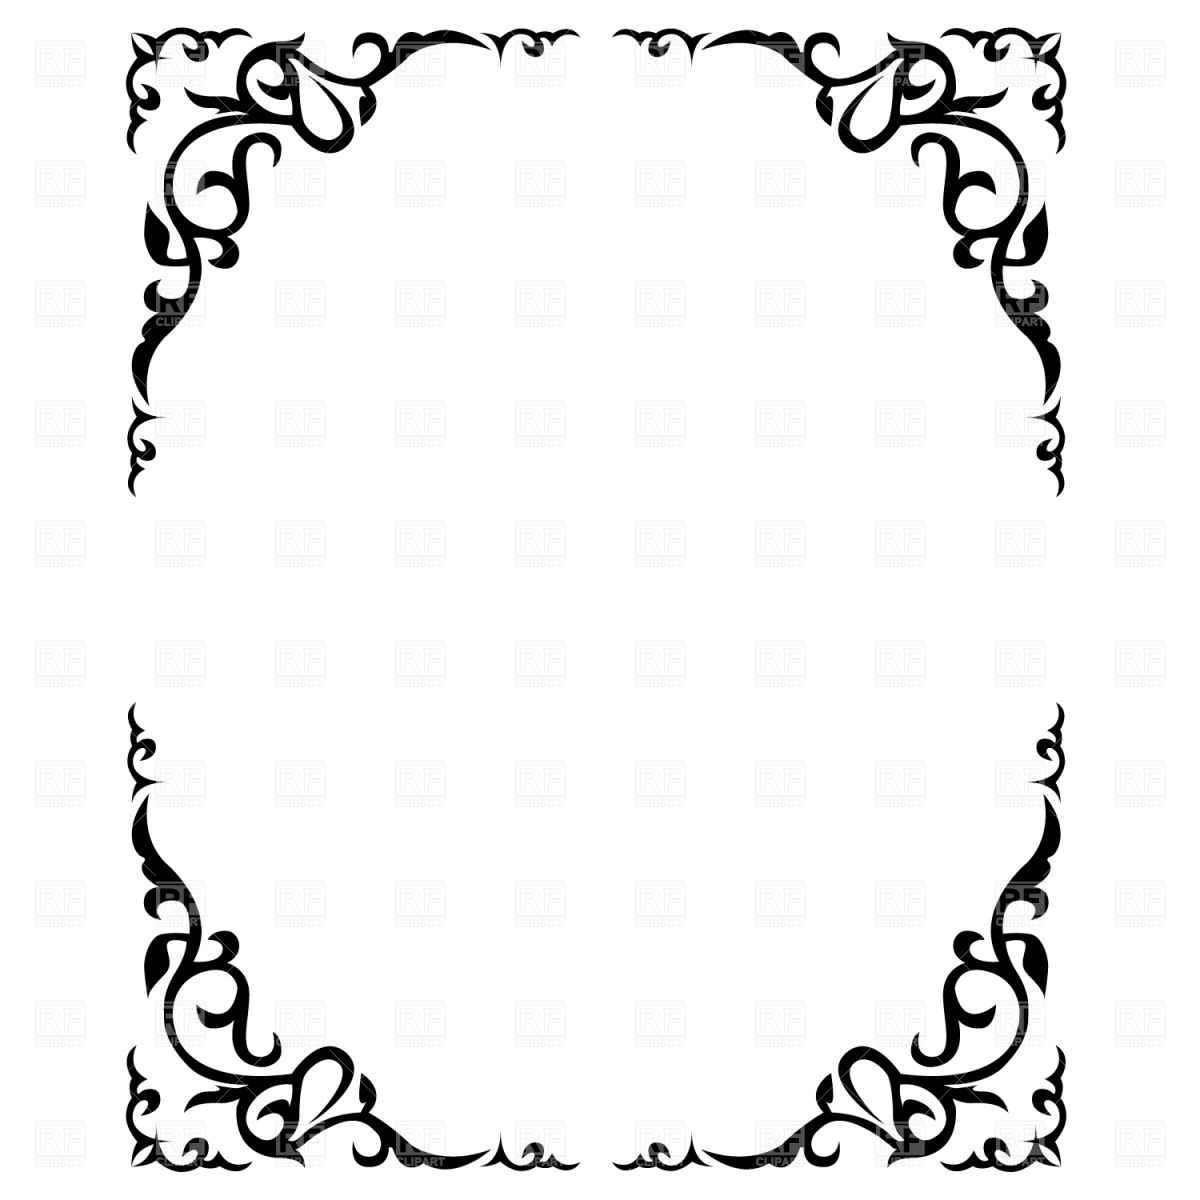 Free Printable Borders and Frames Clip Art